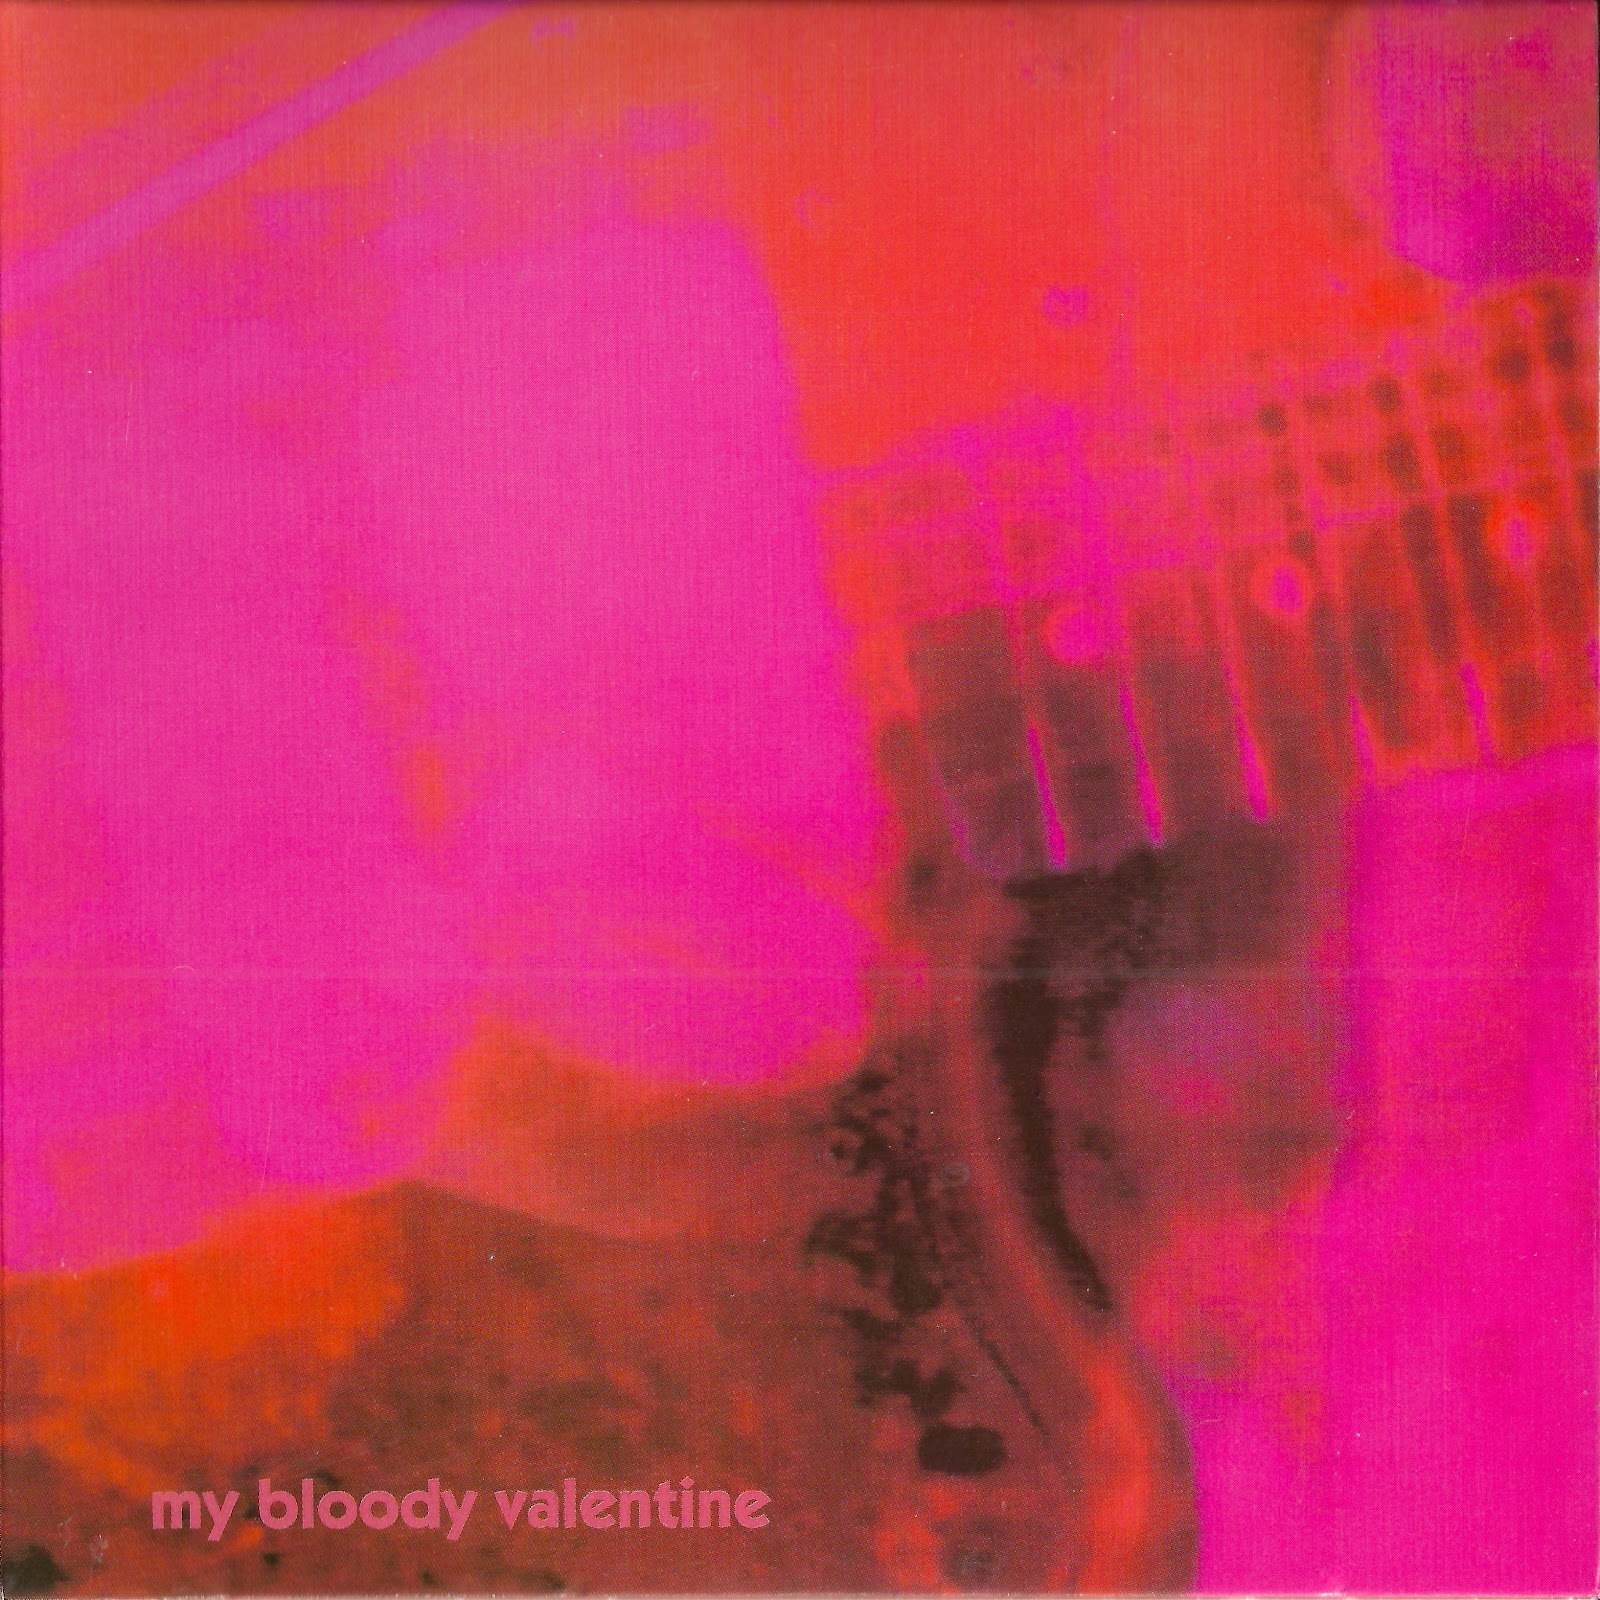 Daily Trojan | My Bloody Valentine's Loveless soars to new heights